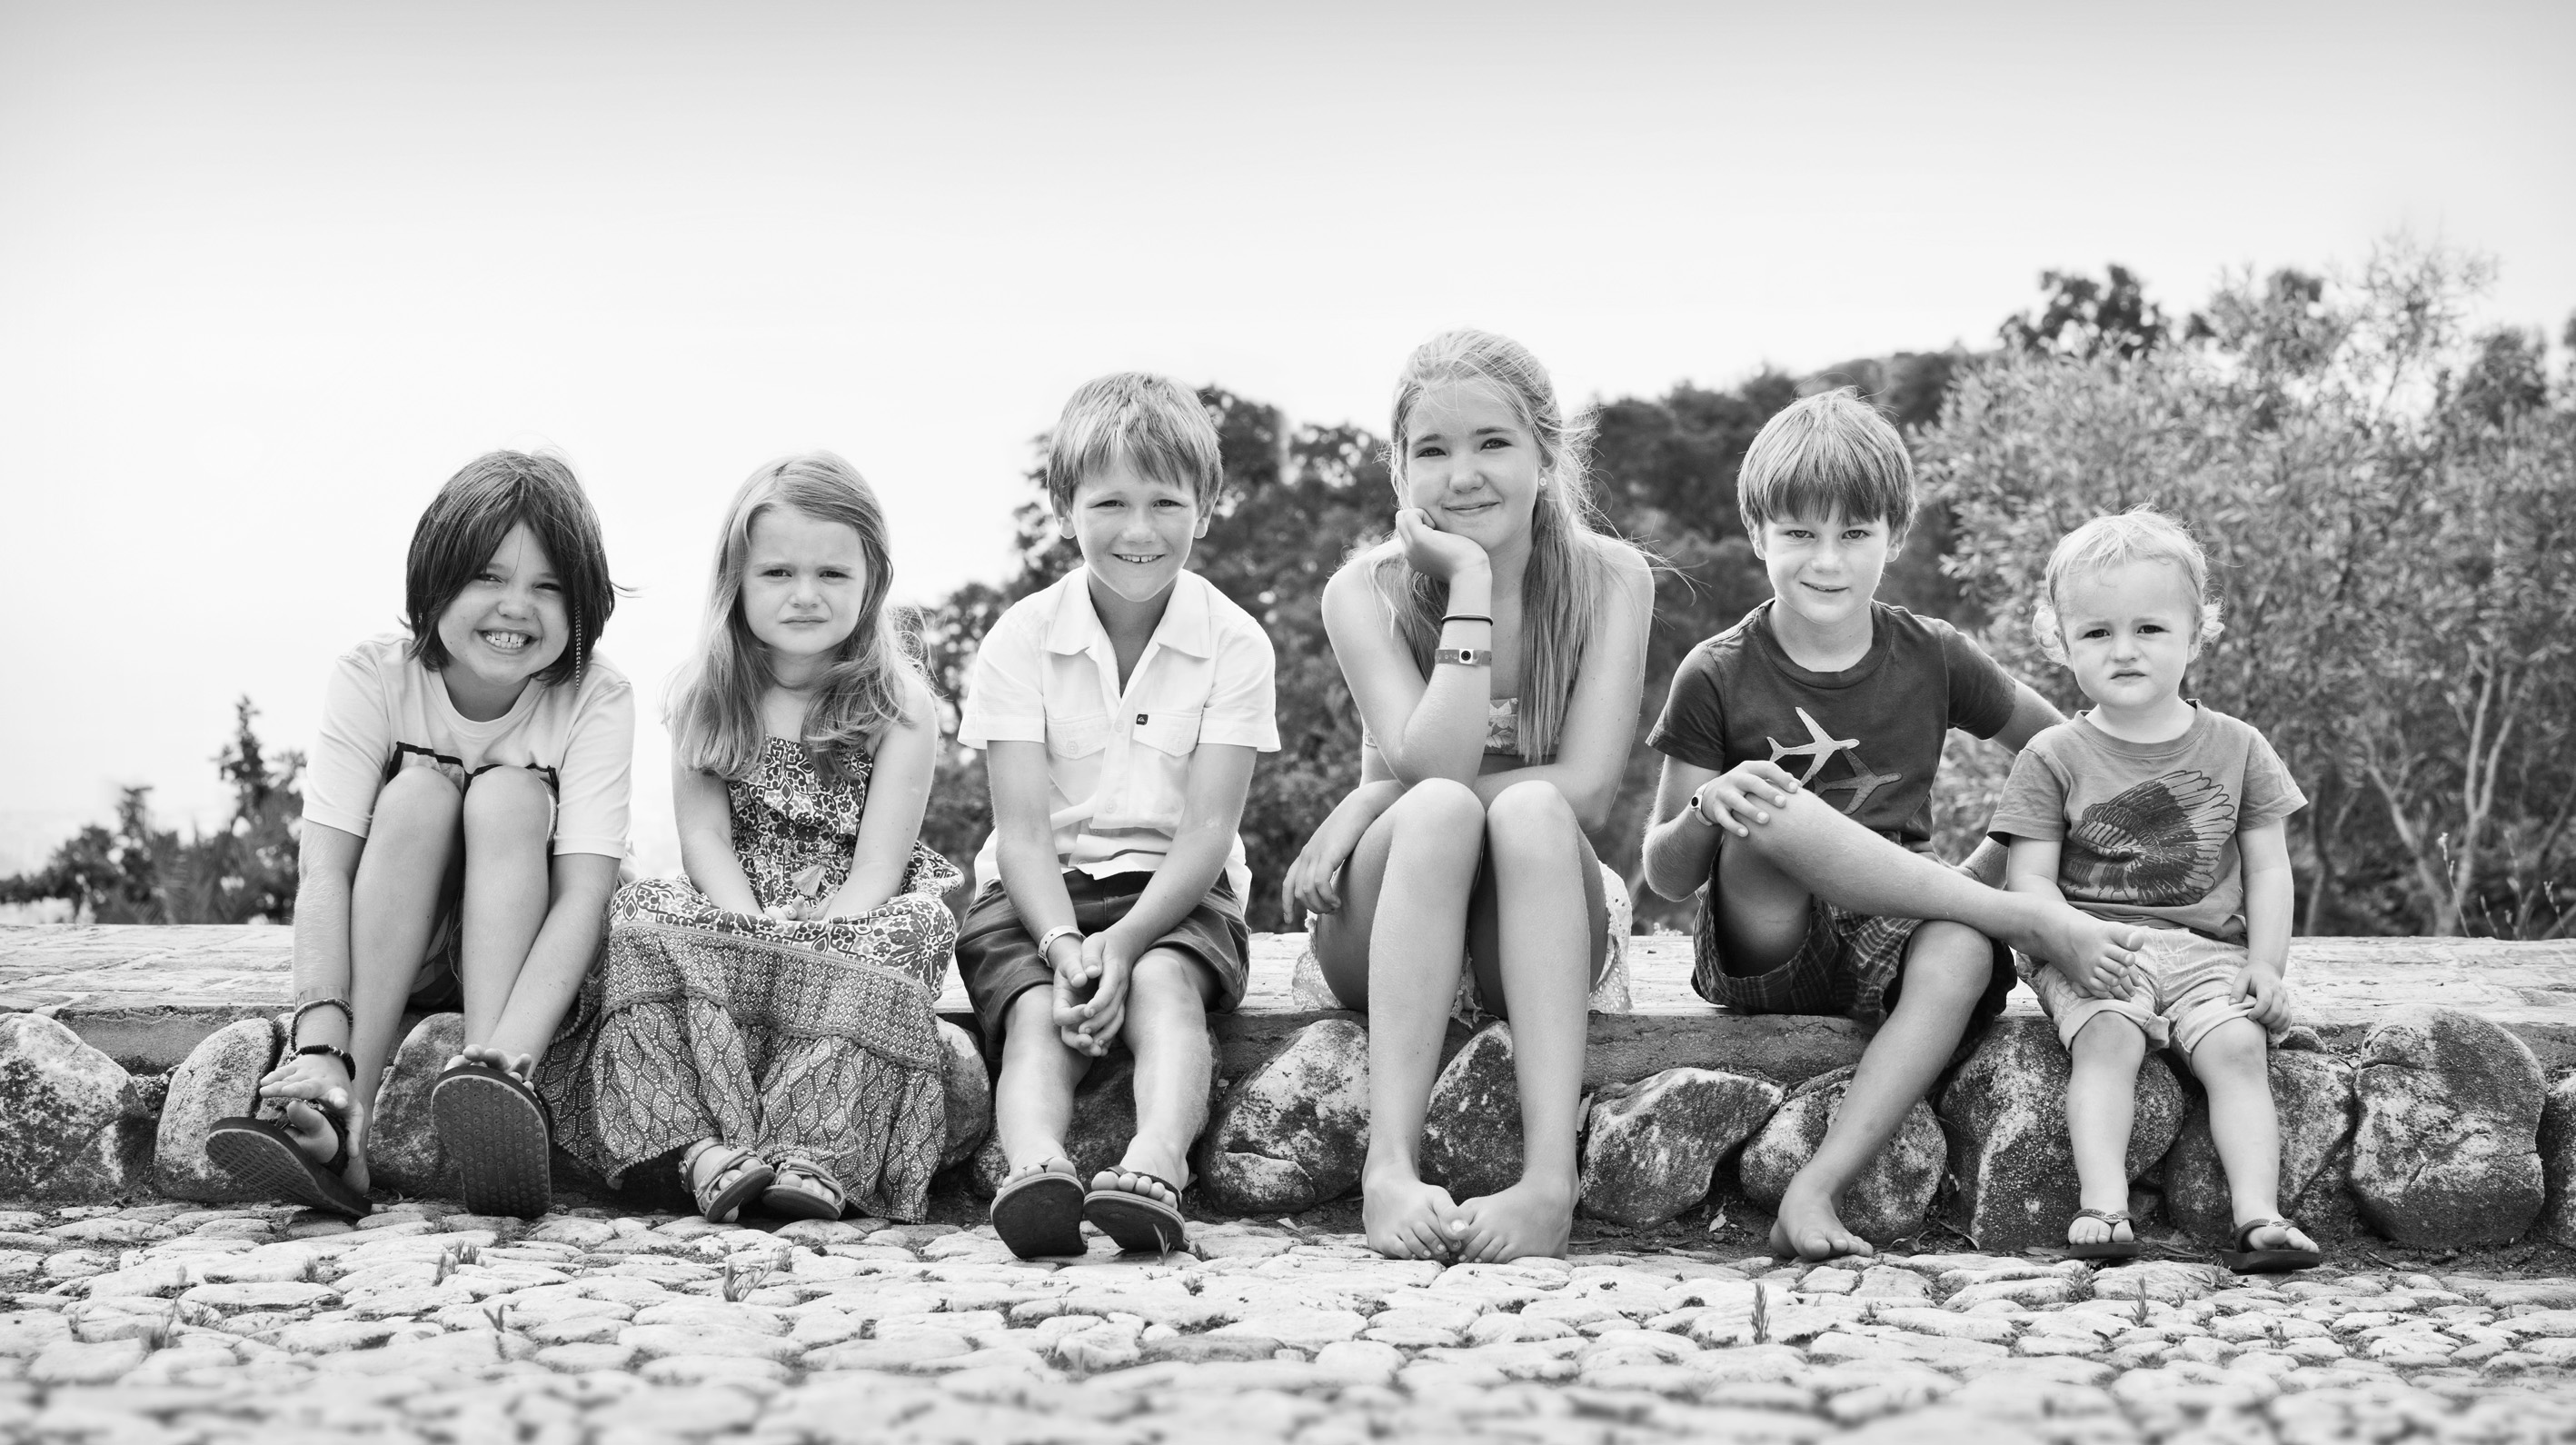 Family Holiday Portrait, Summer times, Portraits on holiday, professional portraits Marbella, remember this?, Best memories, when I was a kid,